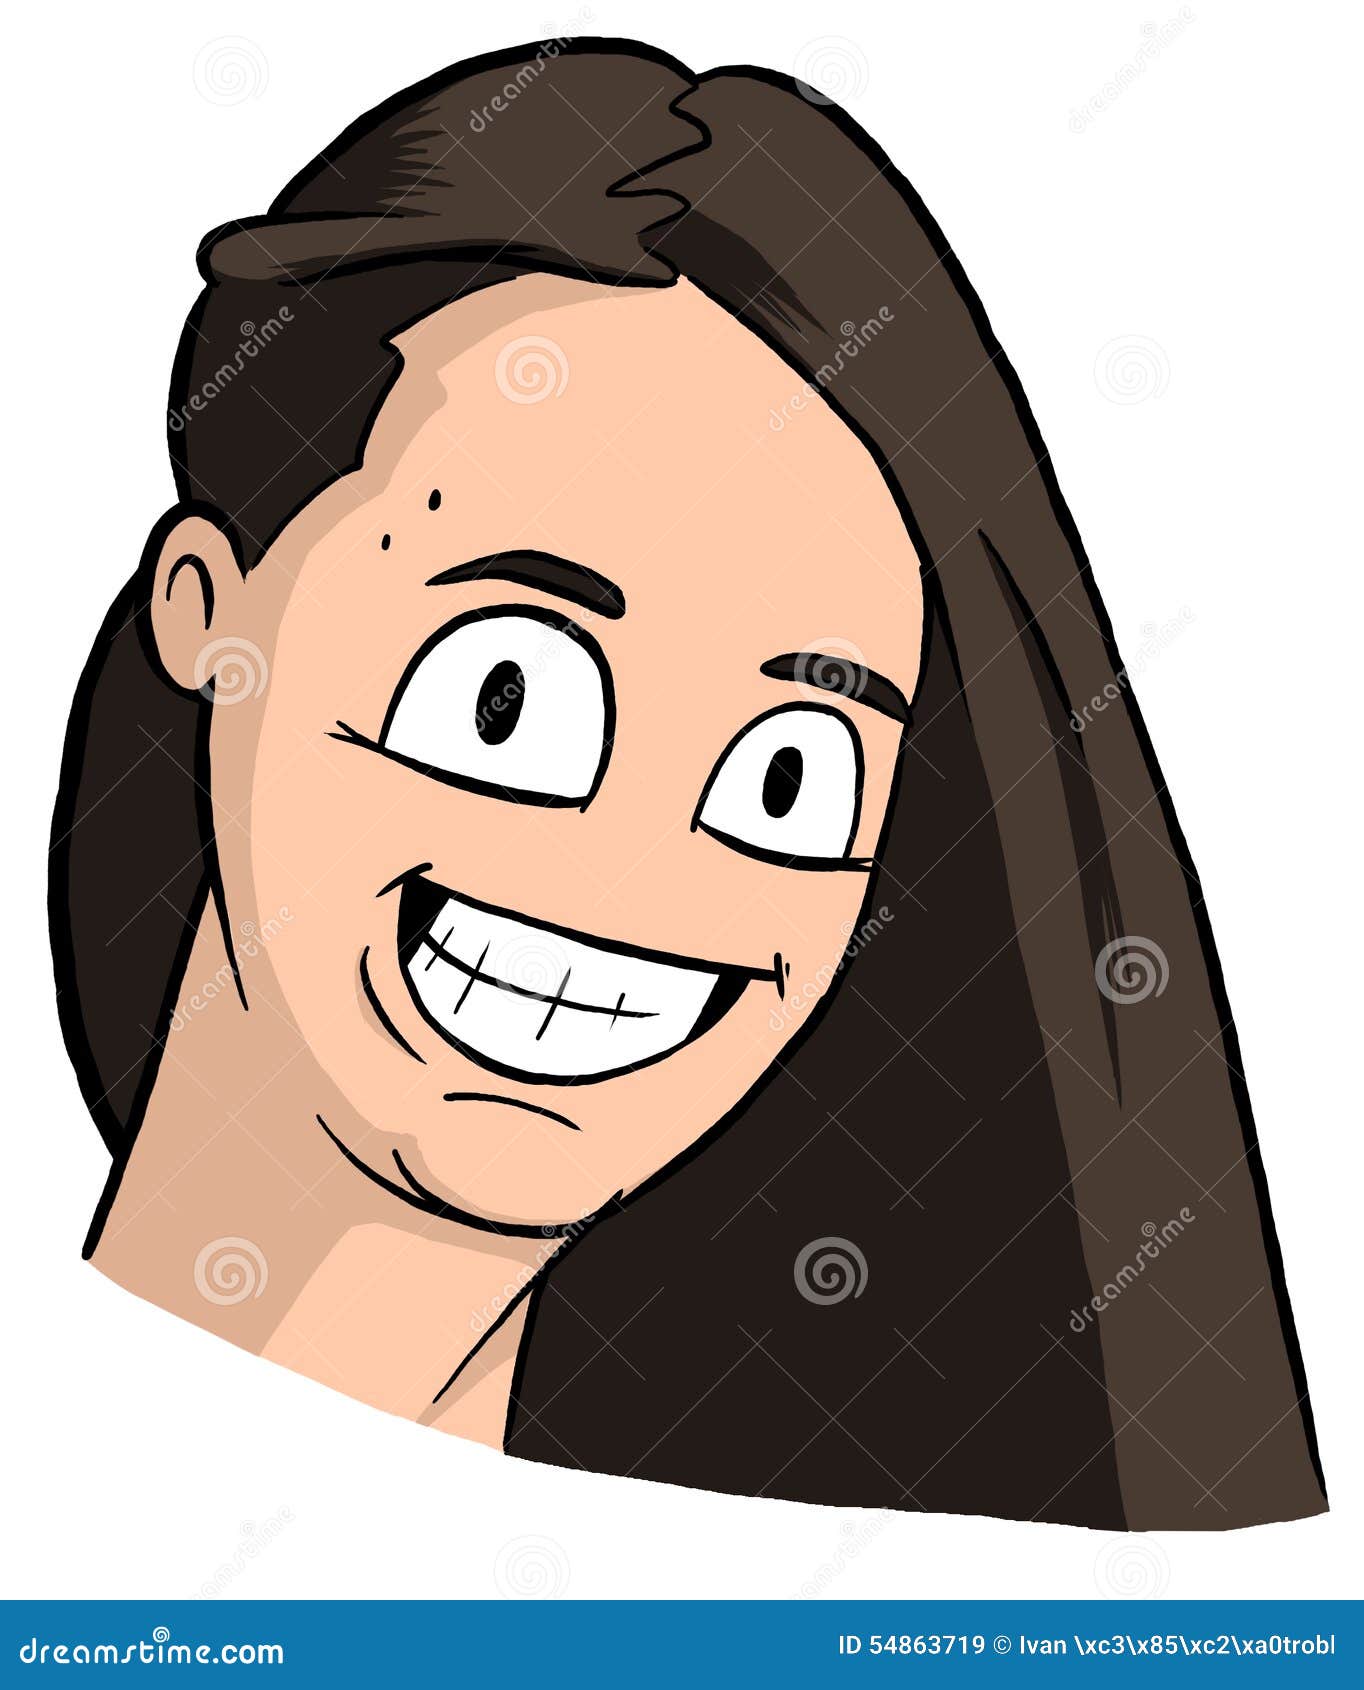 Caricature Of Freckly Girl With Dark Brown Hair Big Eyes